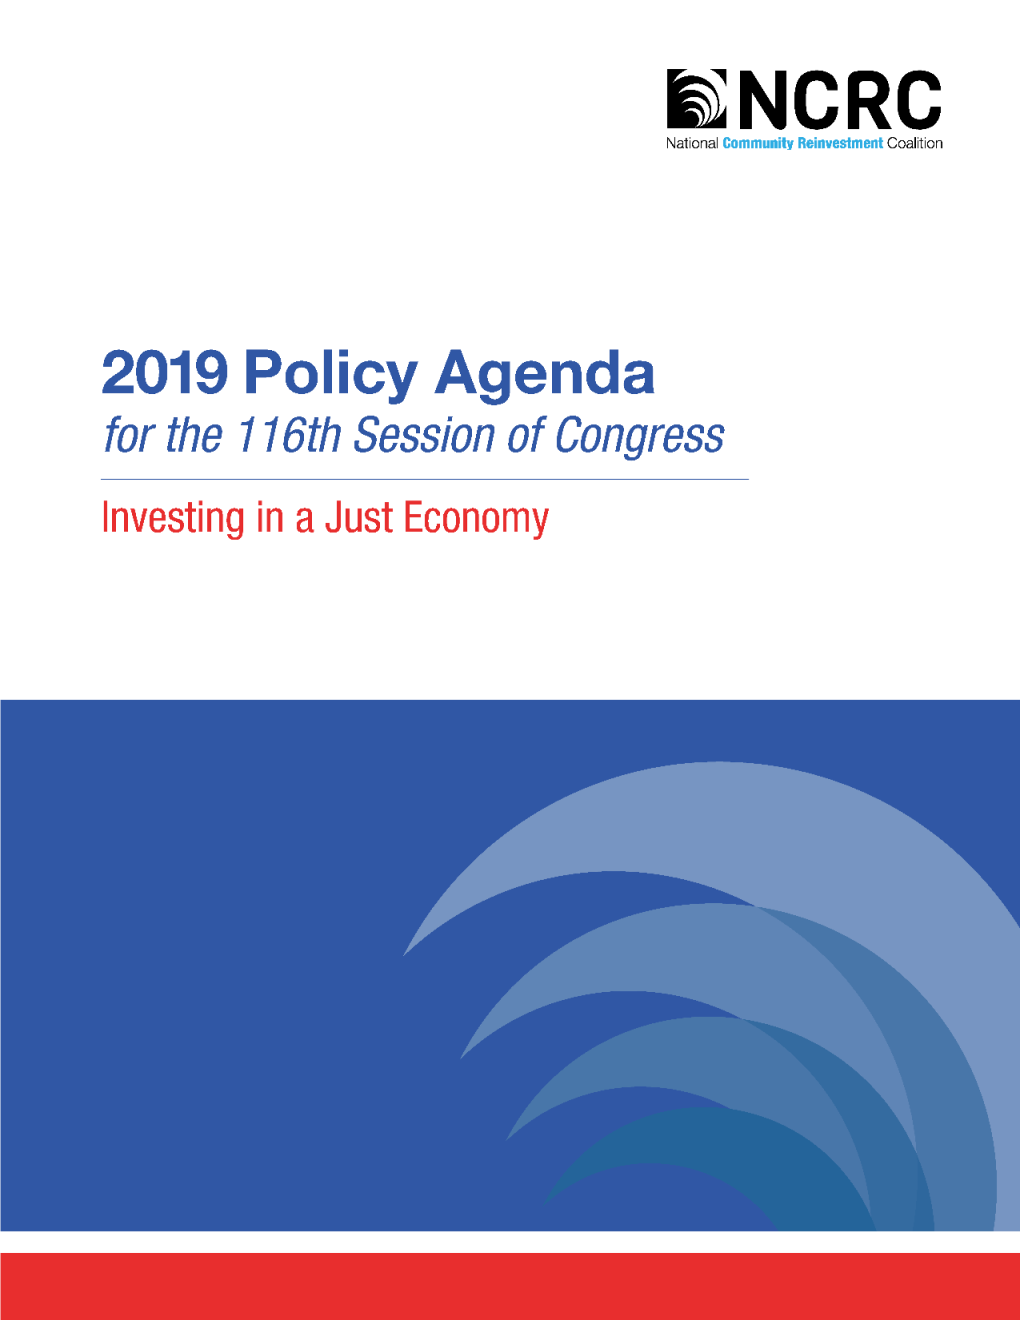 2019 NCRC Policy Agenda WHO WE ARE